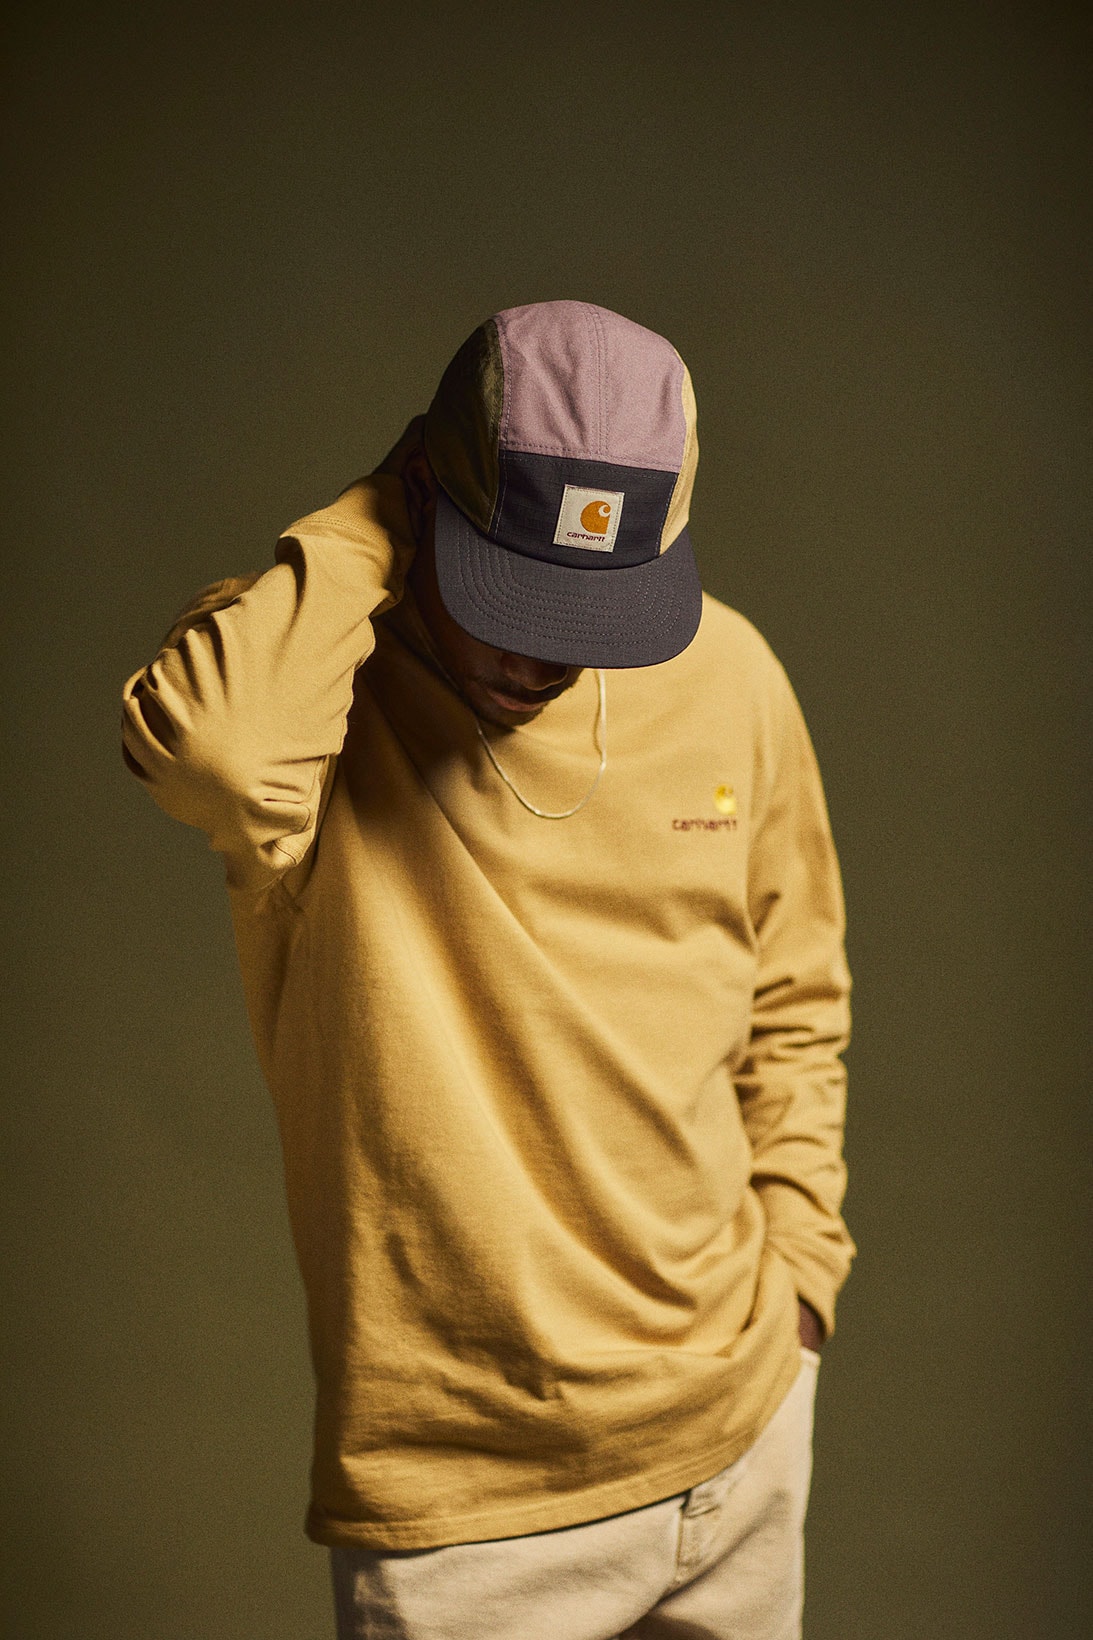 carhartt wip spring summer valiant program collection dog bed hat cap sweater